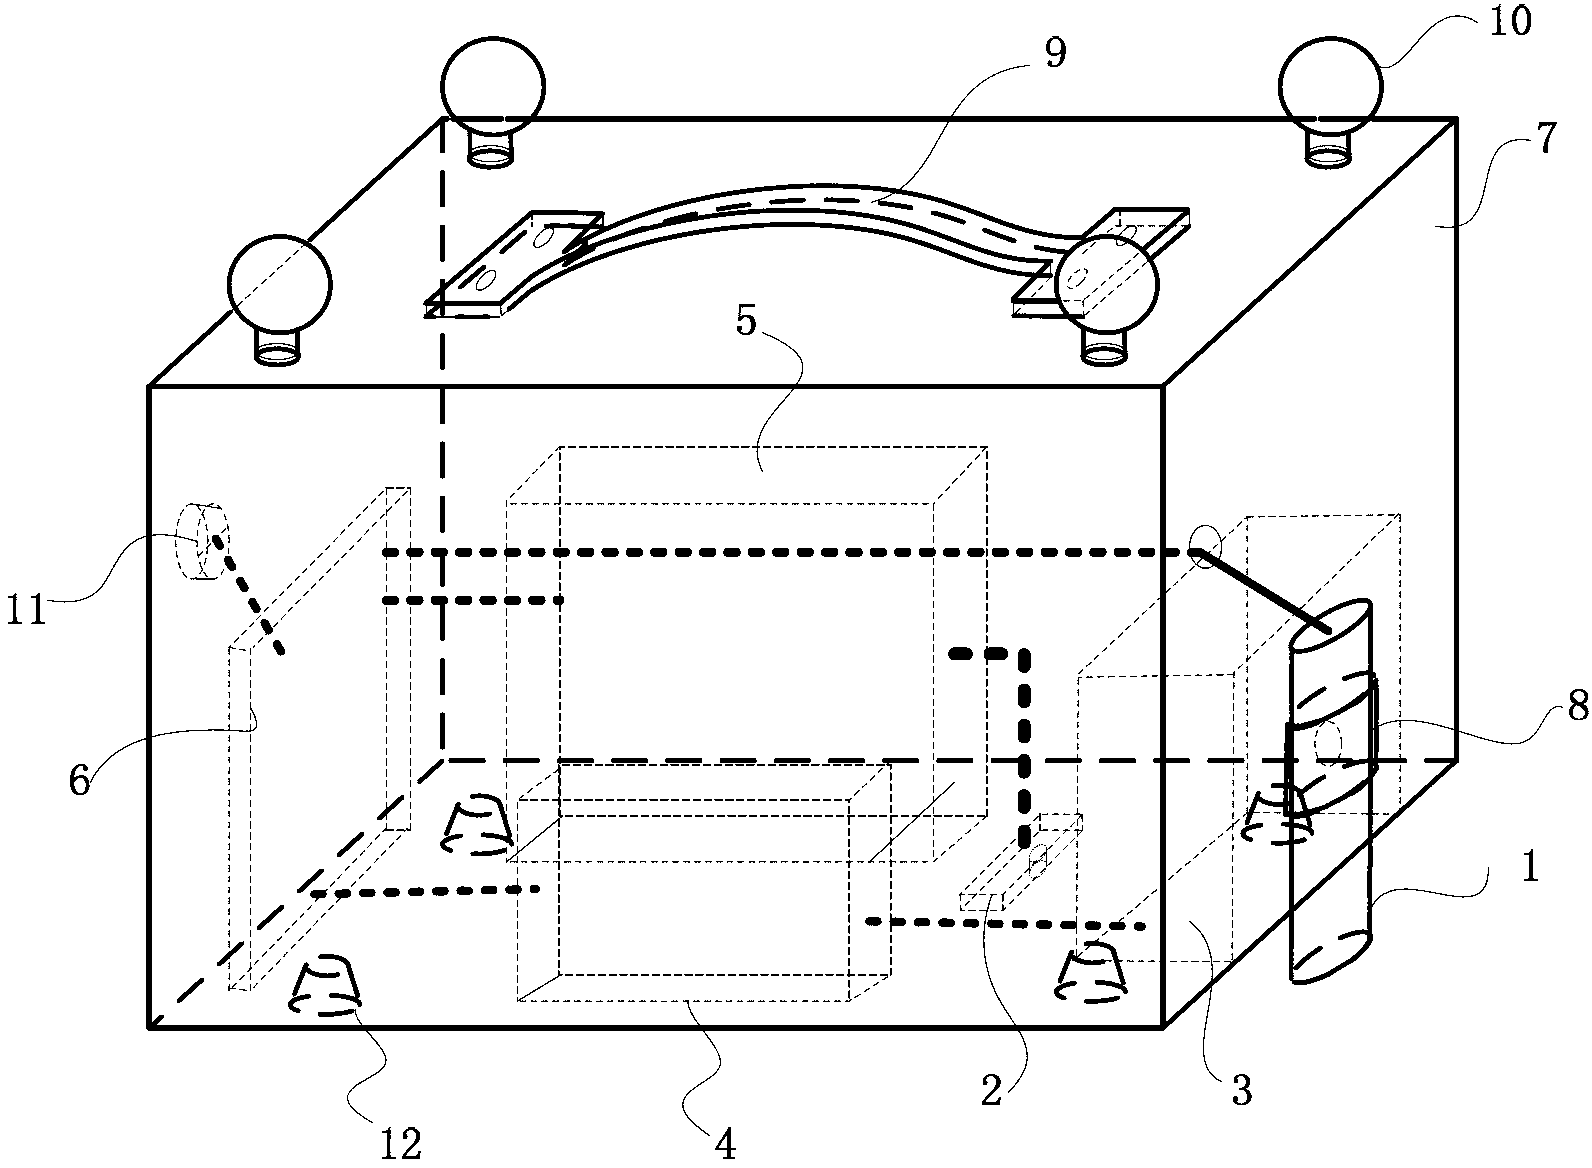 Automatic measuring device for volume of grain pile and measuring method thereof